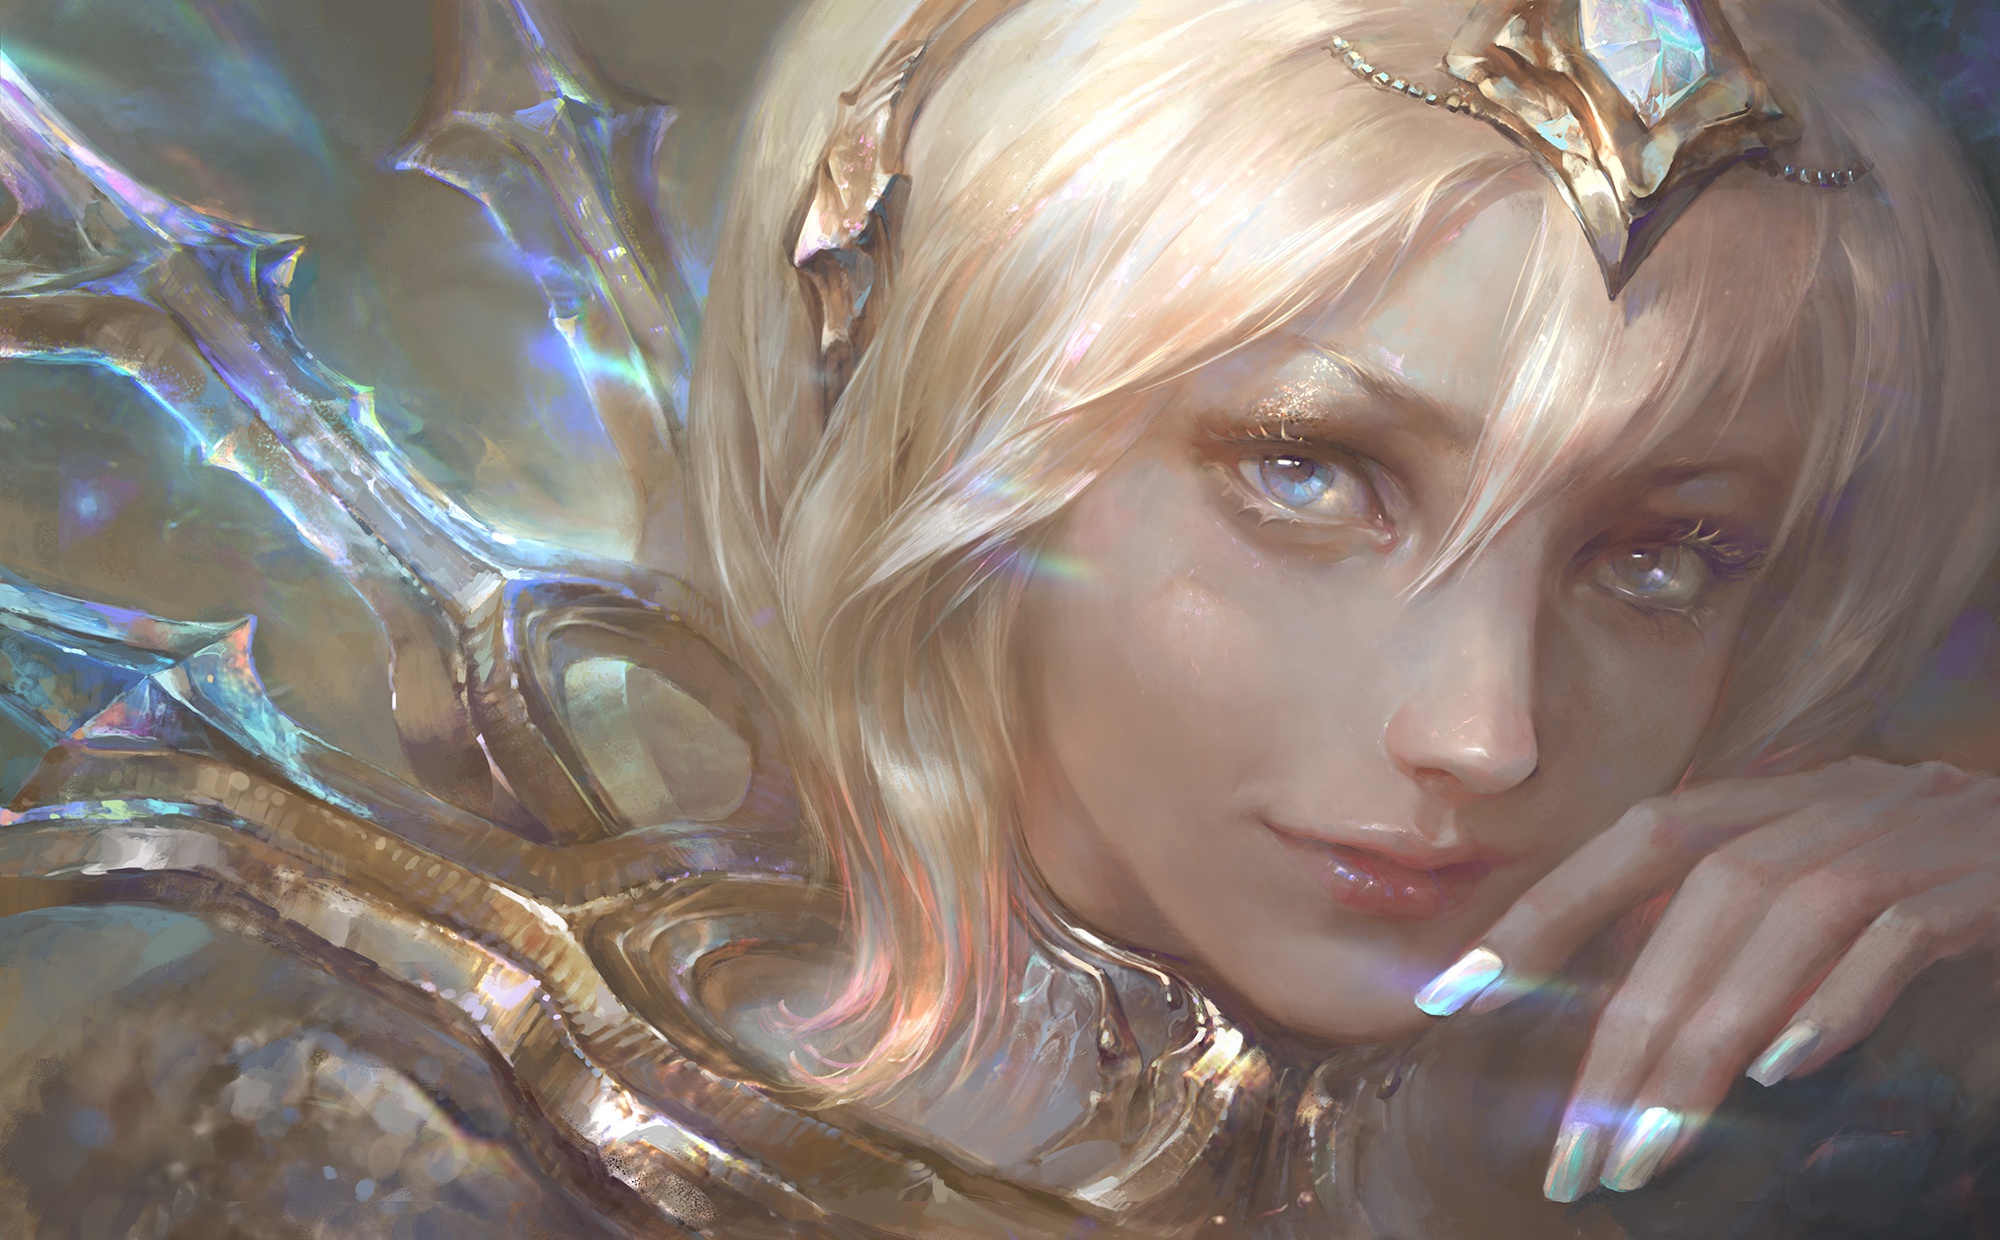 General 2000x1240 League of Legends PC gaming Lux (League of Legends) looking at viewer blonde painted nails women video games video game art video game girls fantasy art fantasy girl face blue eyes